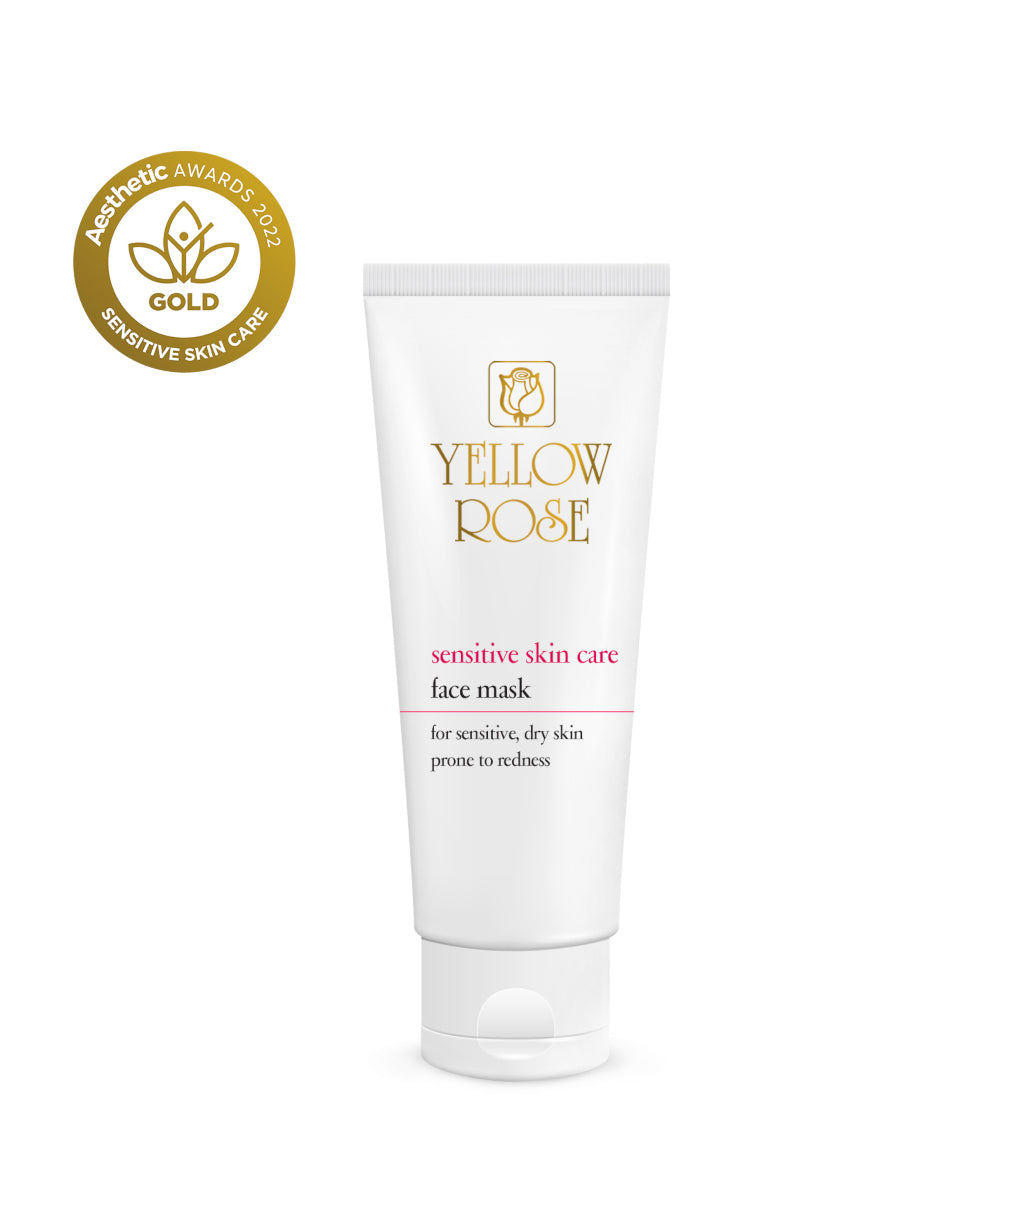 Sensitive skin care mask 50ml by Yellow Rose